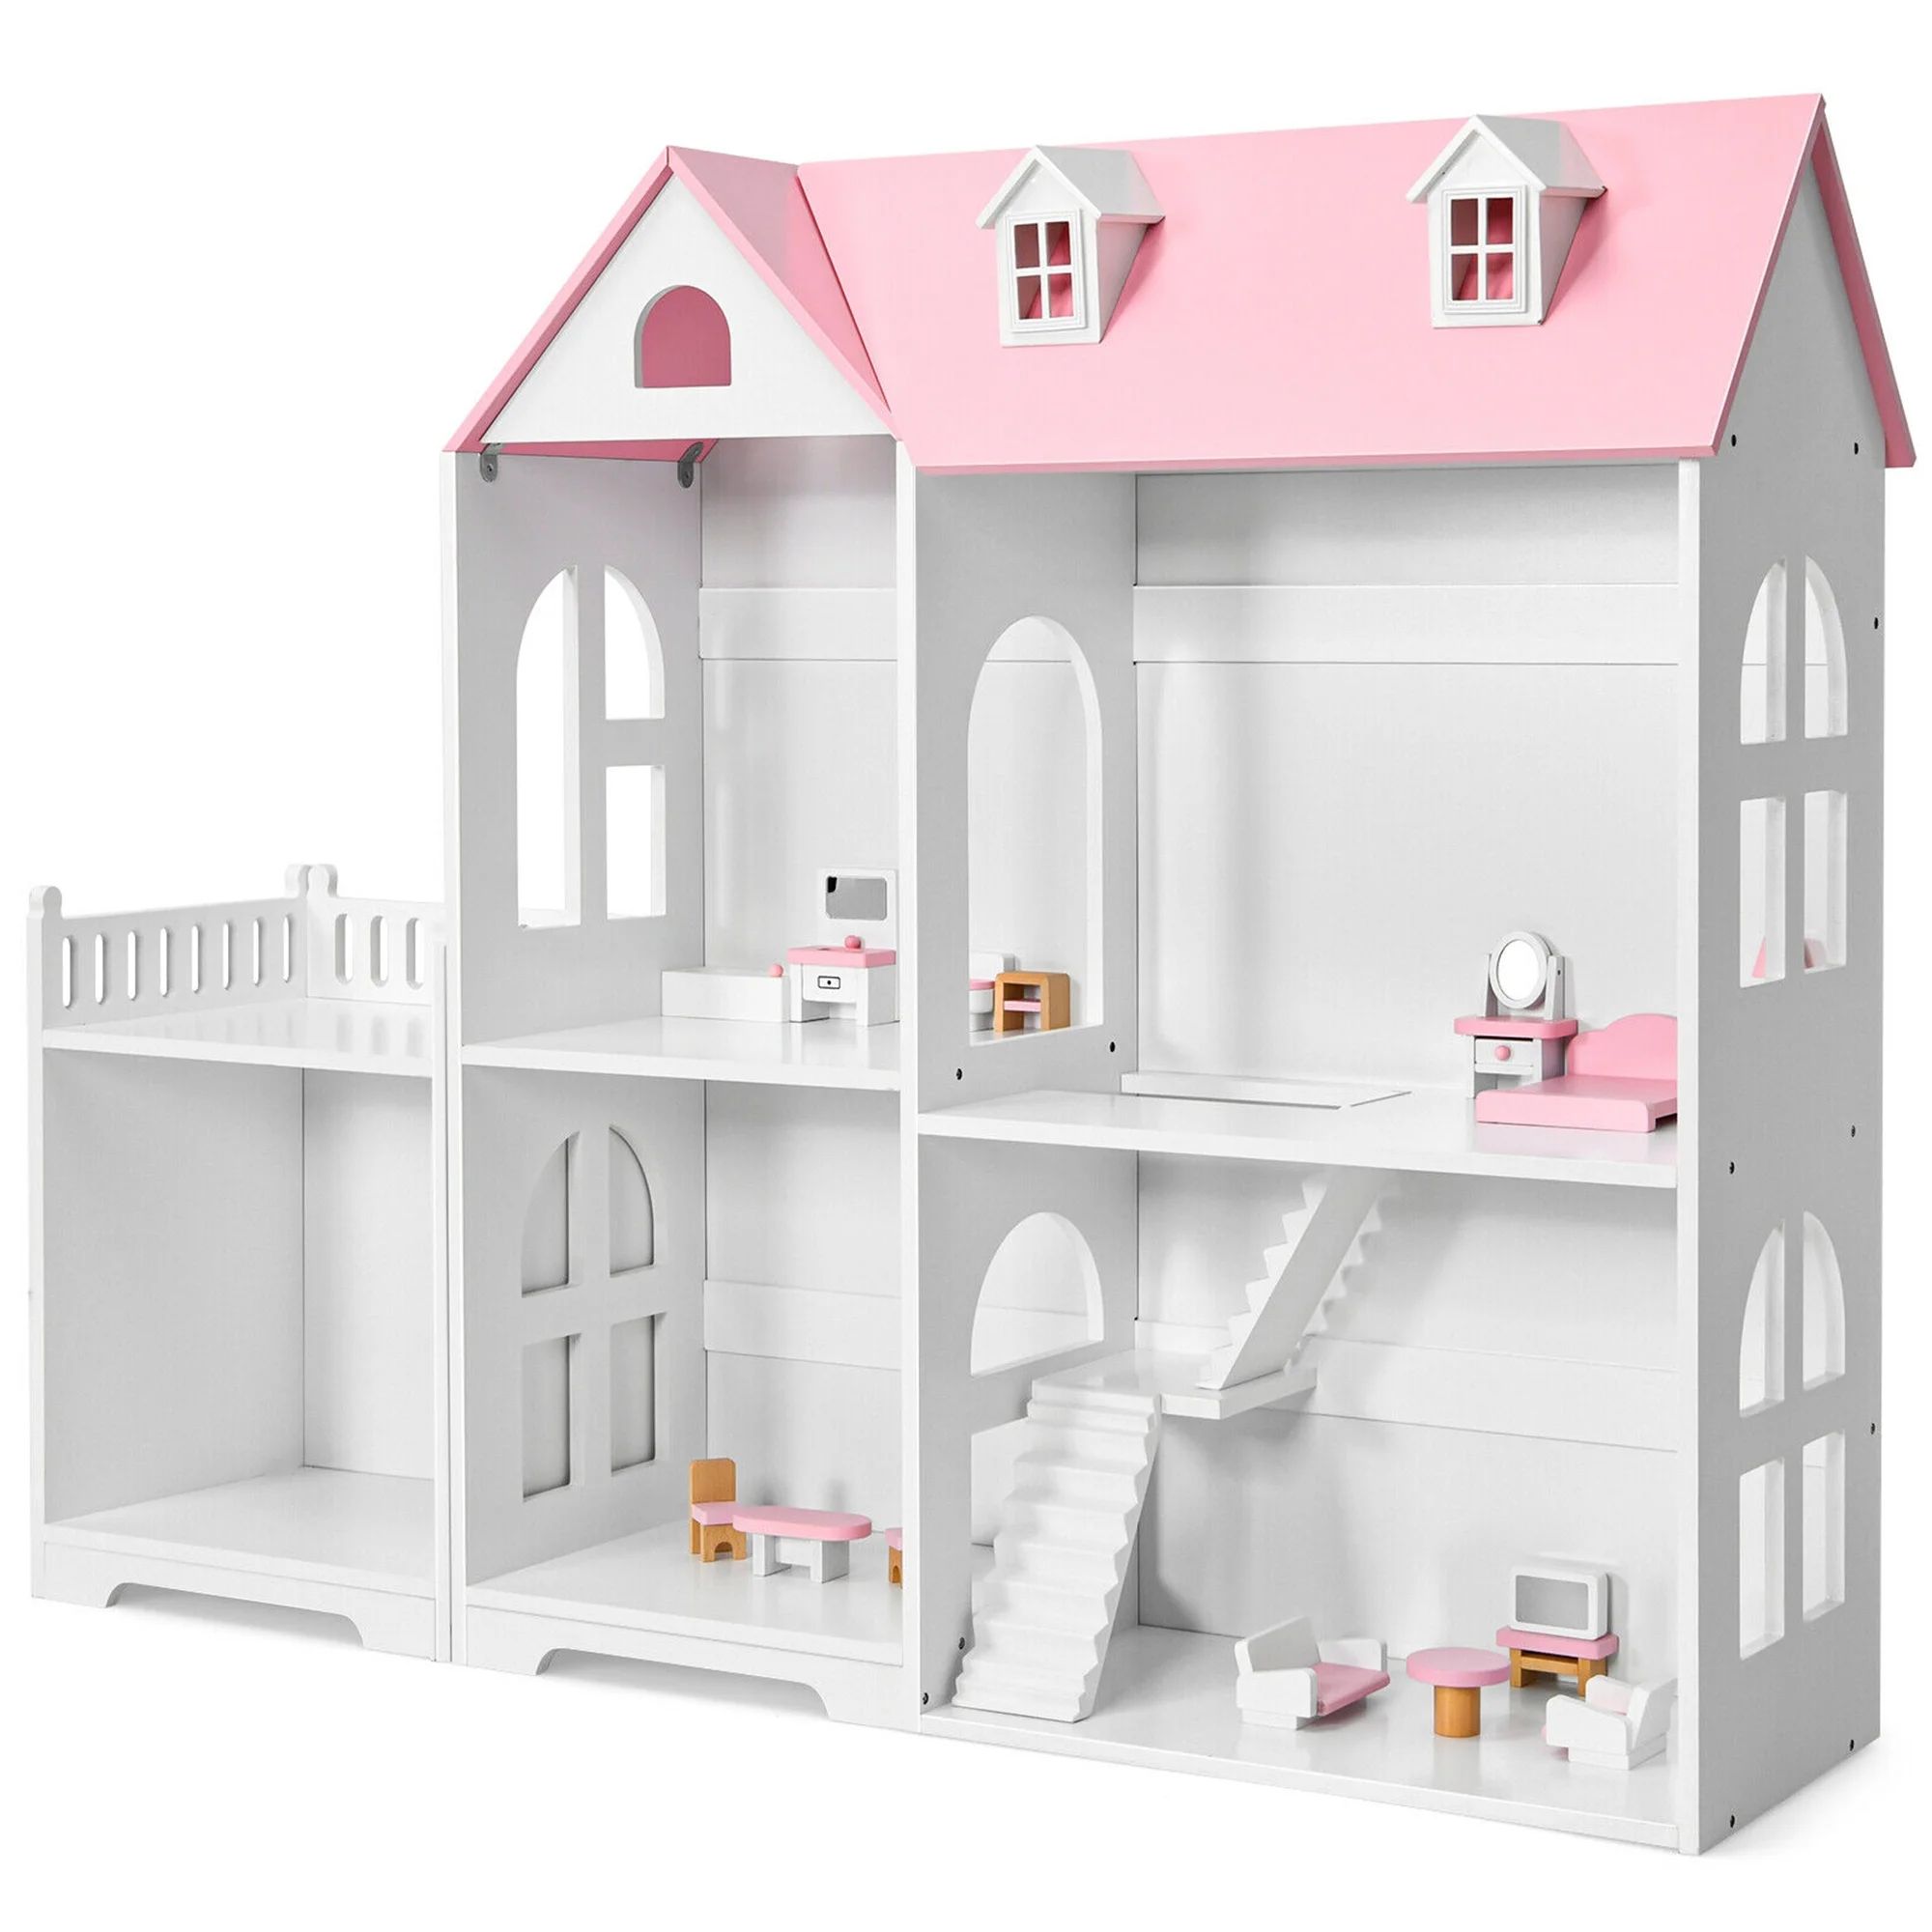 Gymax Dollhouse Bookcase 2-Tier Wooden Multi-Purpose w/ Toy Space Gift Kid's Room Pink | Walmart (US)